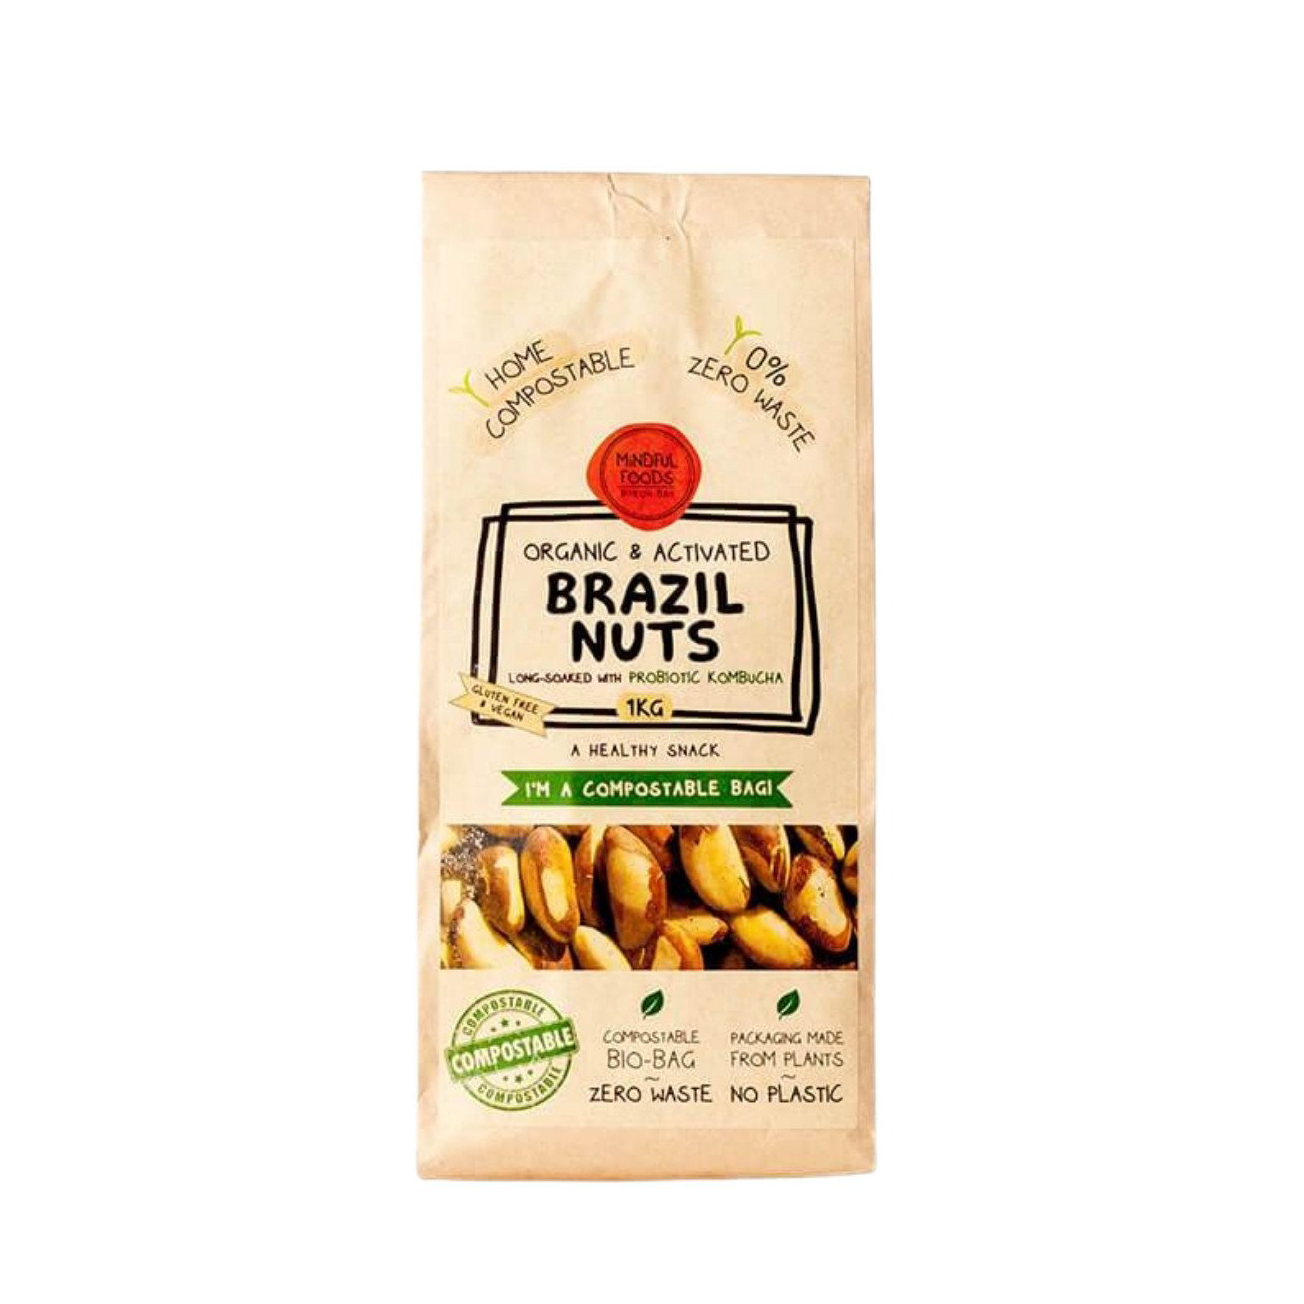 Mindful Foods Brazil Nuts 325g, 650g Or 1kg (Organic & Activated)